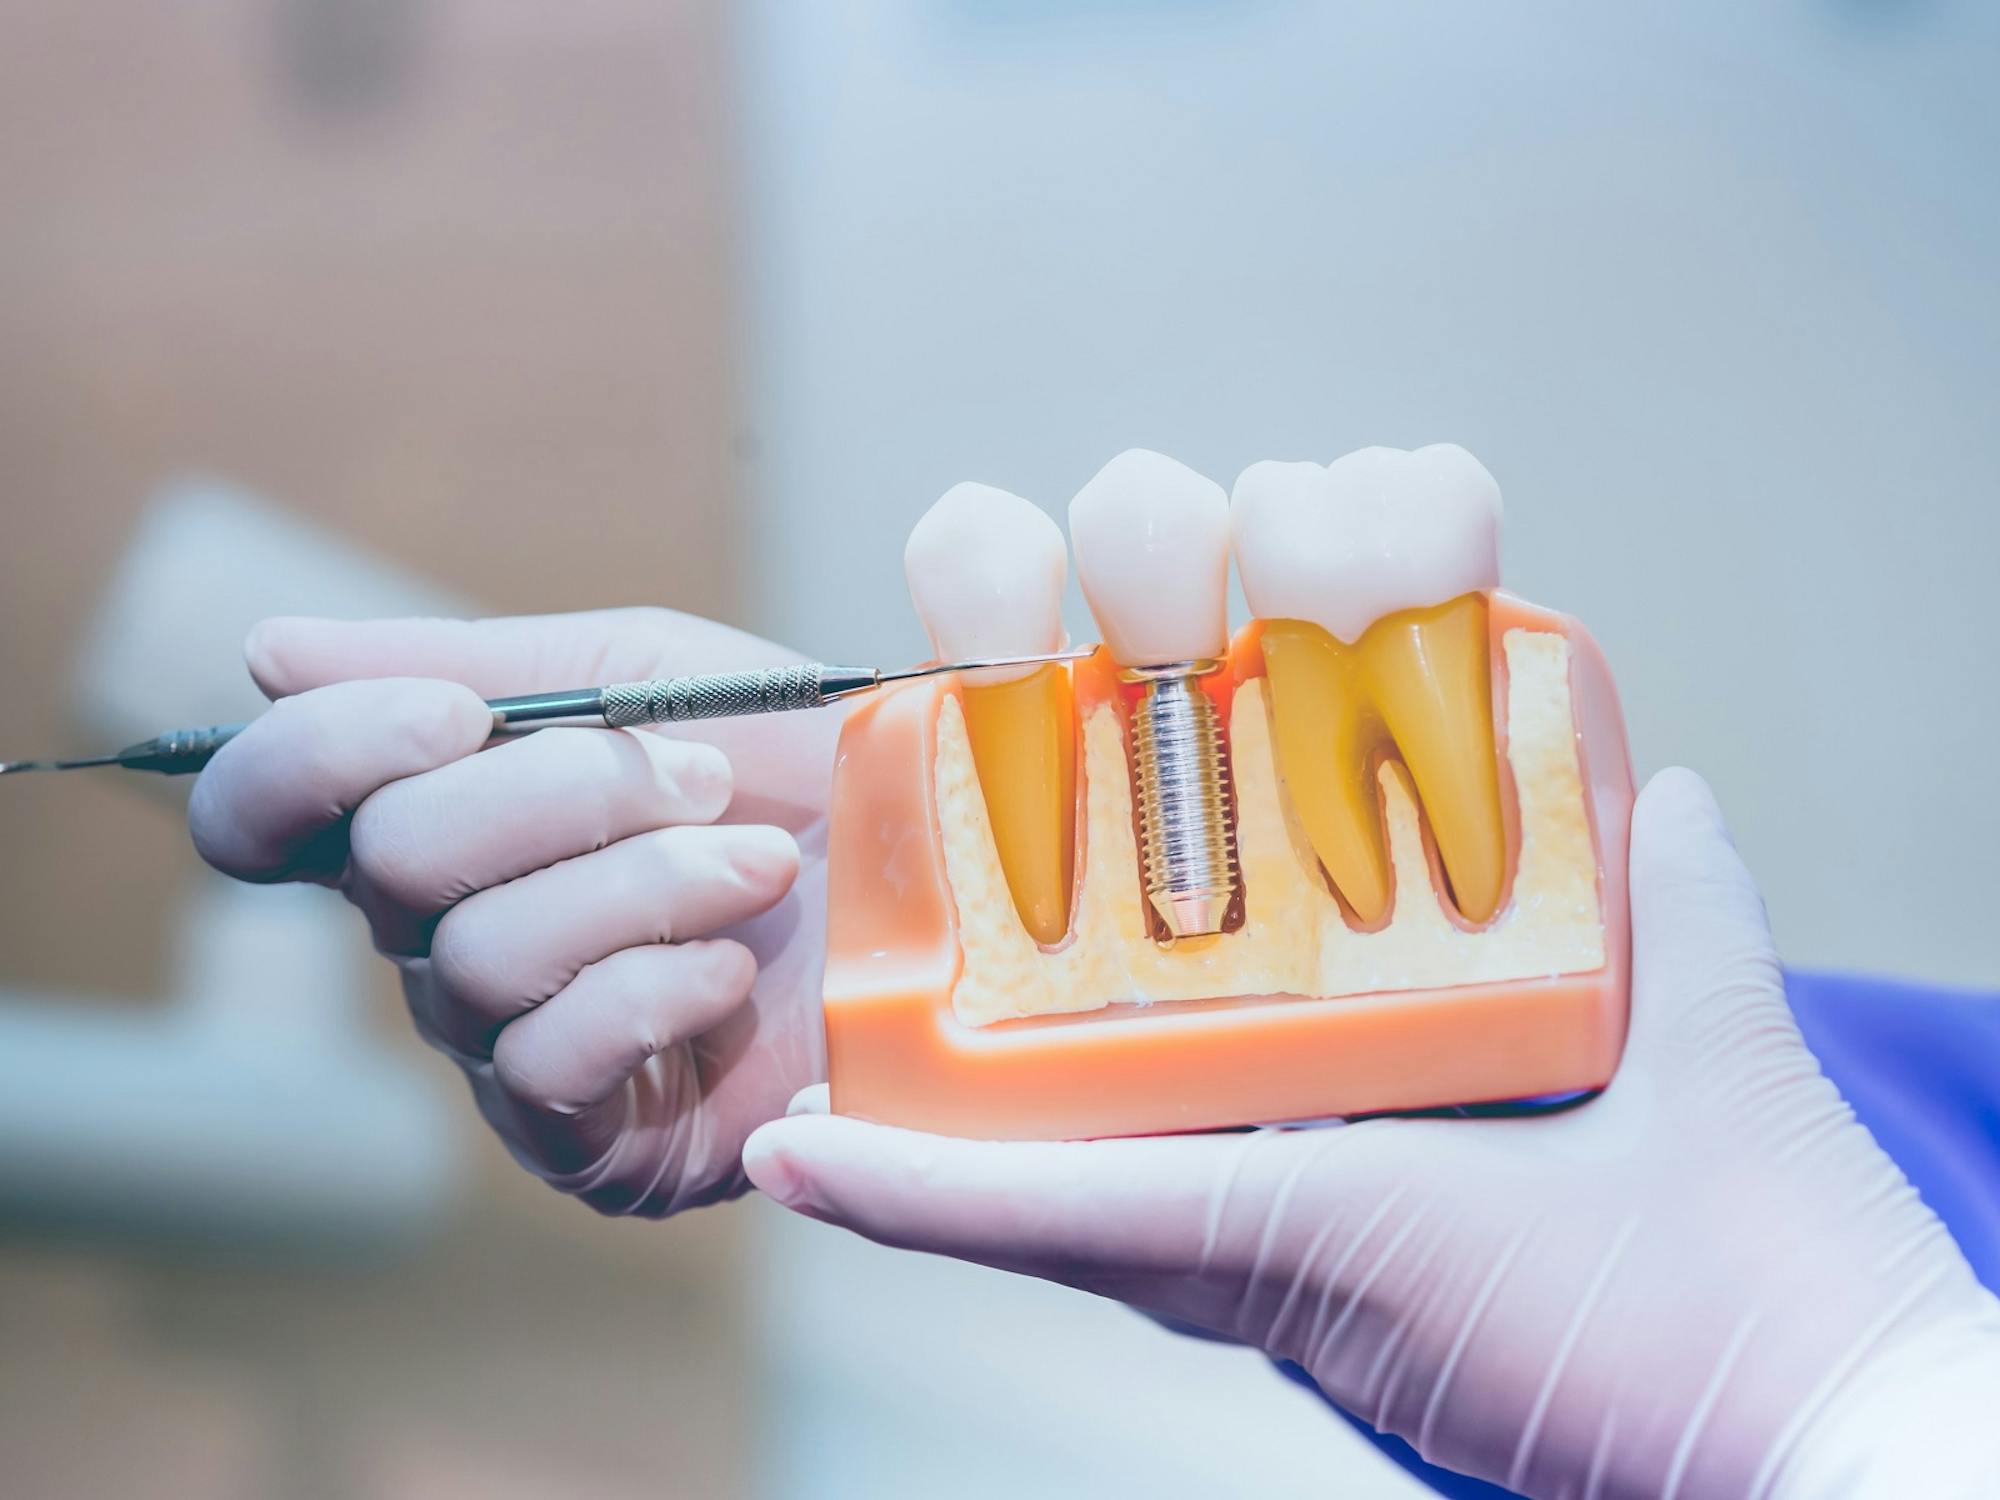 Are Dental Implants Covered Under Medicaid? ClearMatch Medicare